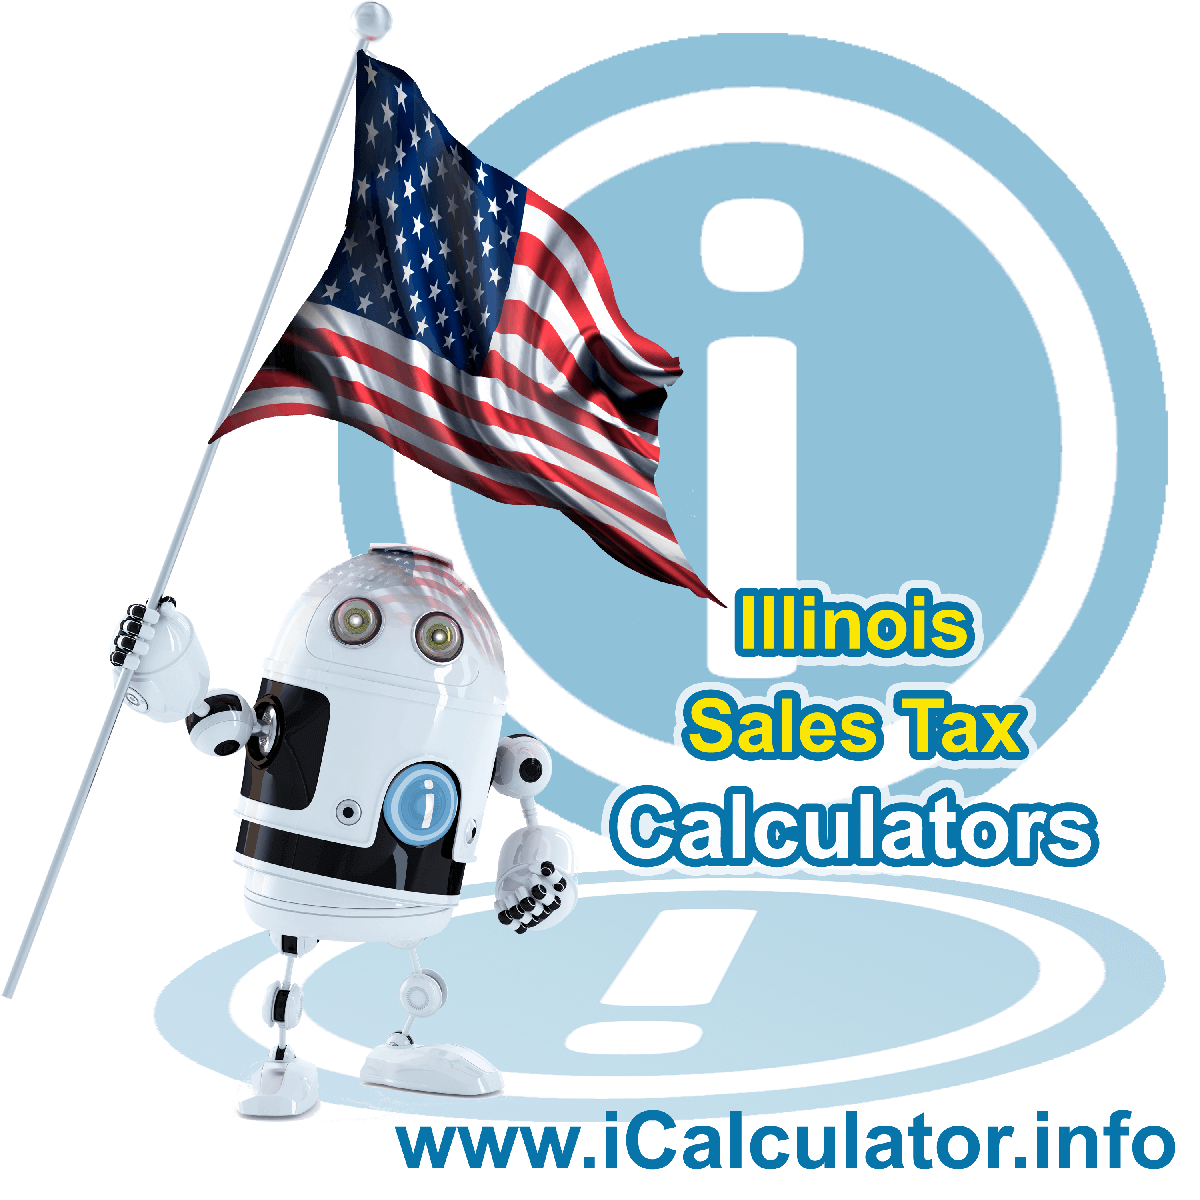 Chatham Sales Rates: This image illustrates a calculator robot calculating Chatham sales tax manually using the Chatham Sales Tax Formula. You can use this information to calculate Chatham Sales Tax manually or use the Chatham Sales Tax Calculator to calculate sales tax online.